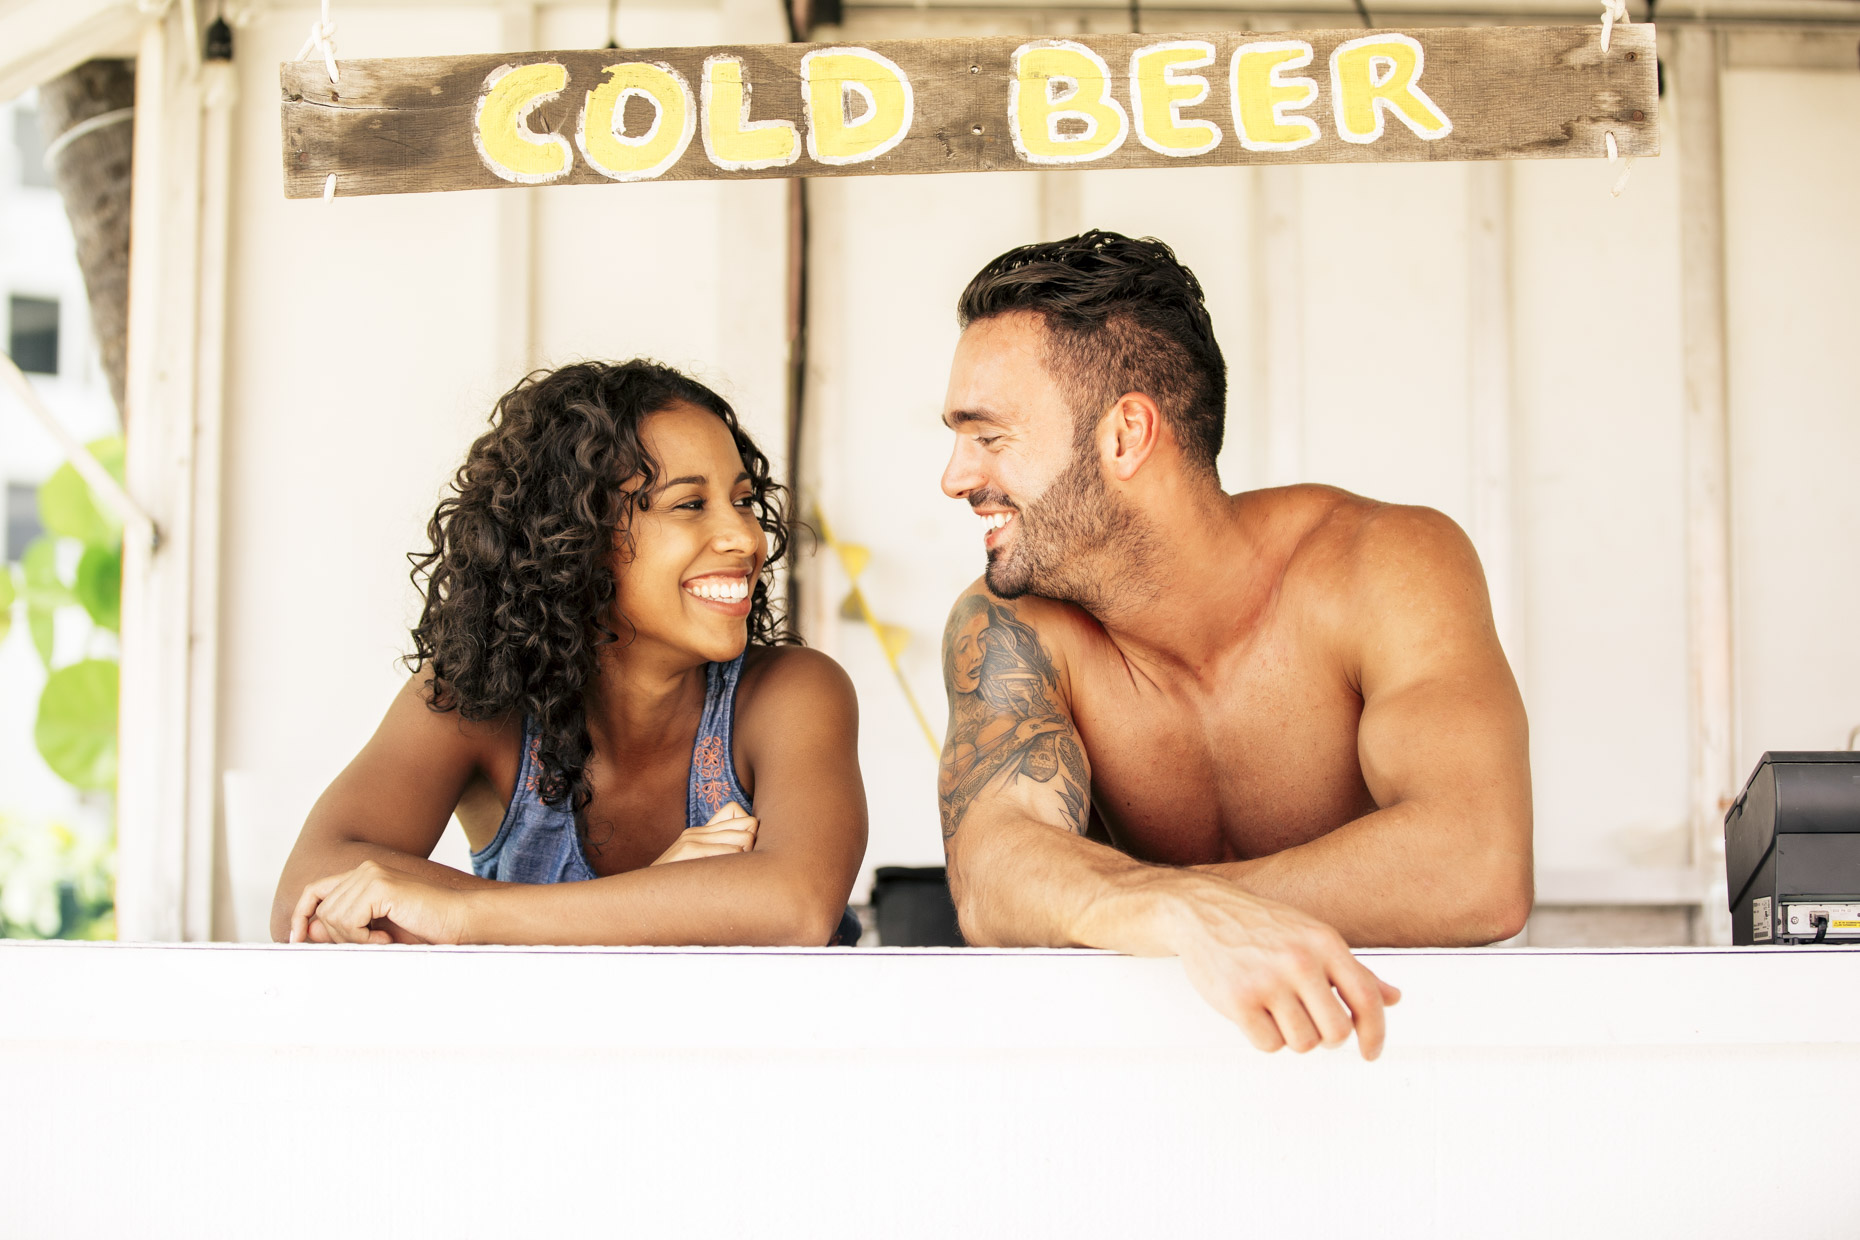 Man and woman laughing and talking under cold beer sign